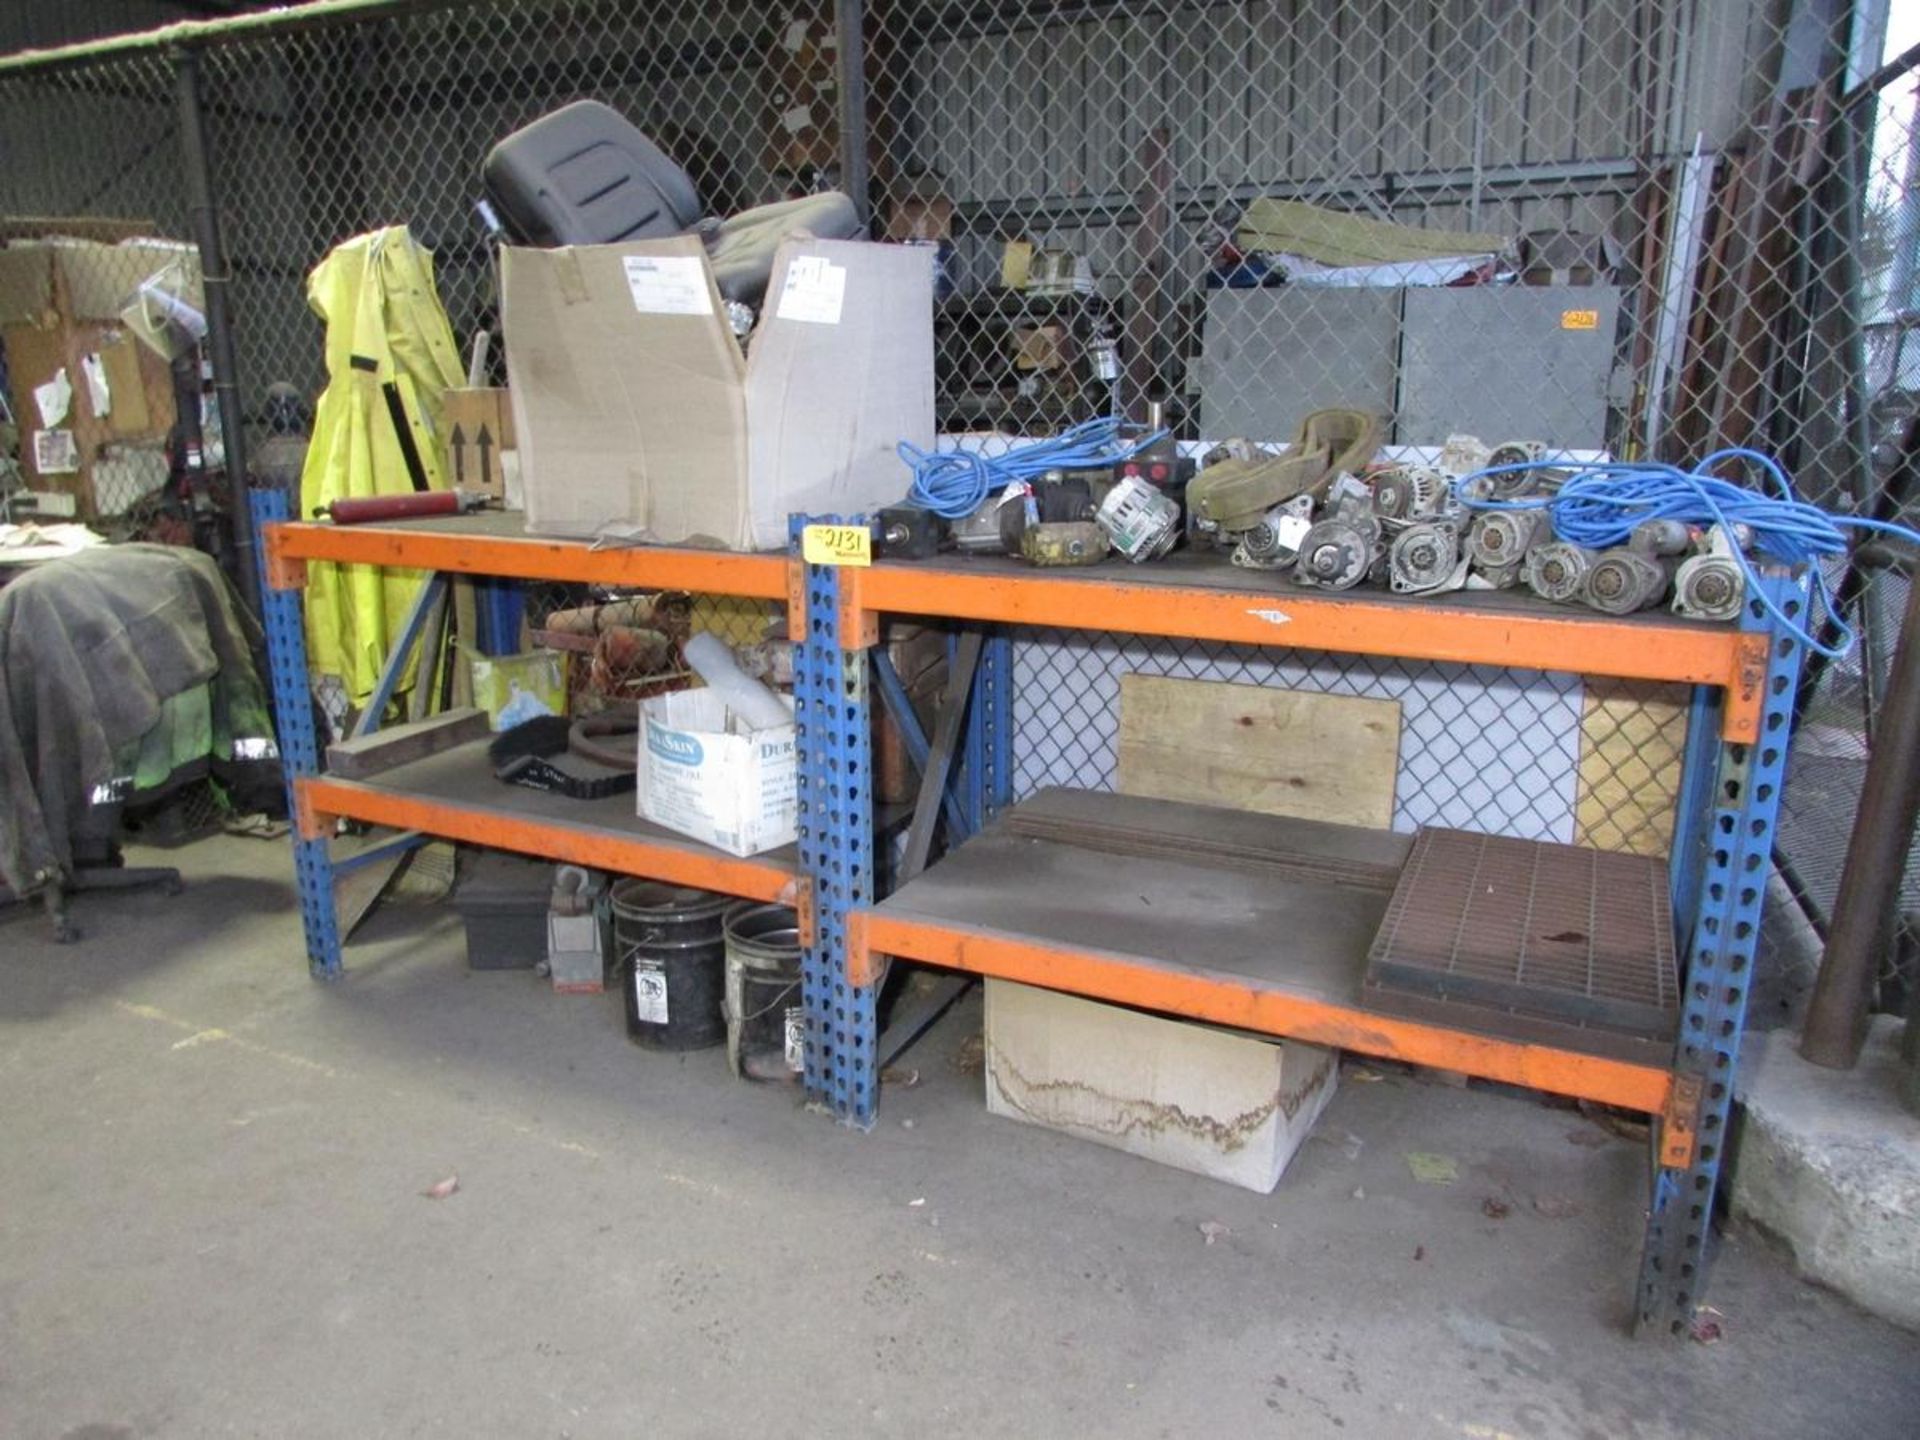 Remaining Contents of Maintenance Storage Cage - Image 11 of 12